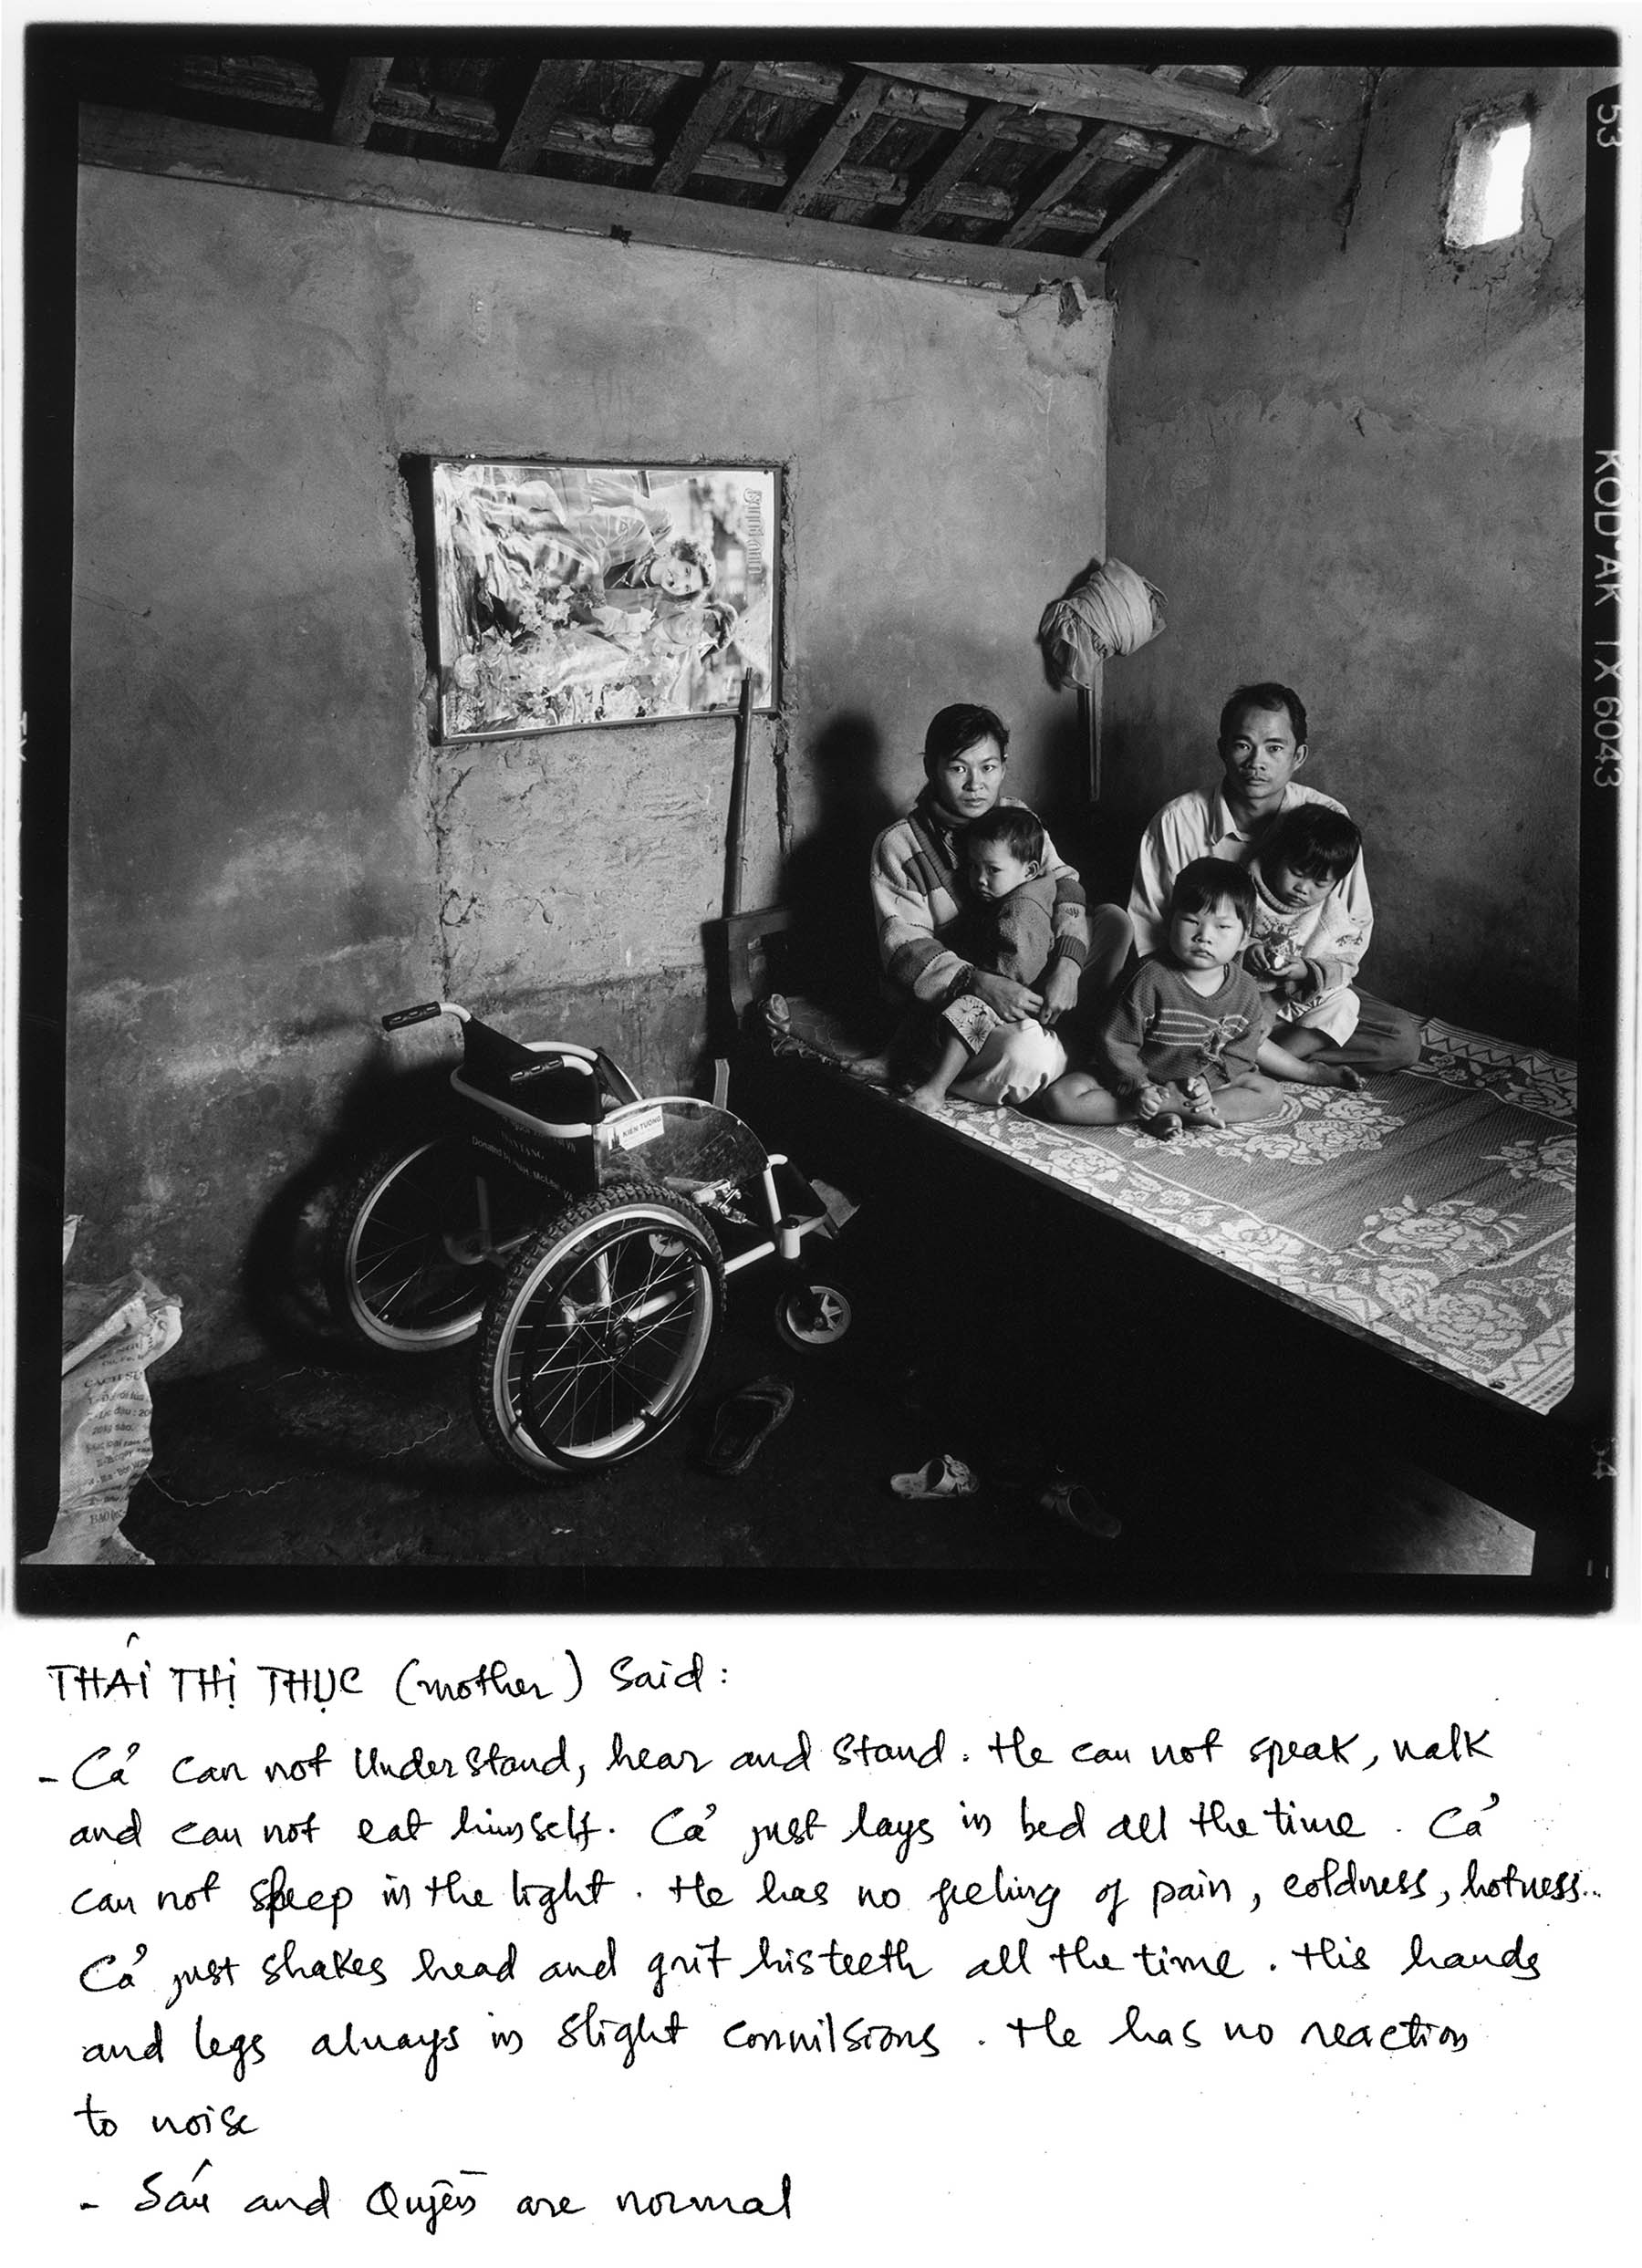 Cam Lo district (Quang Tri province) just south of the former North-South border is one of the heavily sprayed areas. 
Tran Dinh Ca (boy, 6, centre) is a possible victim. The other 2 children of farmers Tran Dinh Hieu (father, 30) and Thai Thi Thuc (mother, 28) - Tran Thi Sau (girl, 5, right) and Tran Dinh Quyen (boy, 3, left) are OK. The mother: "Ca can't understand, speak, hear nor walk or stand. He can't eat by himself. He just lies in bed all the time. Ca has no feeling of pain, or cold and heat. He just shales his head and grinds his teeth all the time. He doesn't react to noise, and his hands and legs are always in slight convulsions." They live in Cam Hieu commune (Cam Lo).